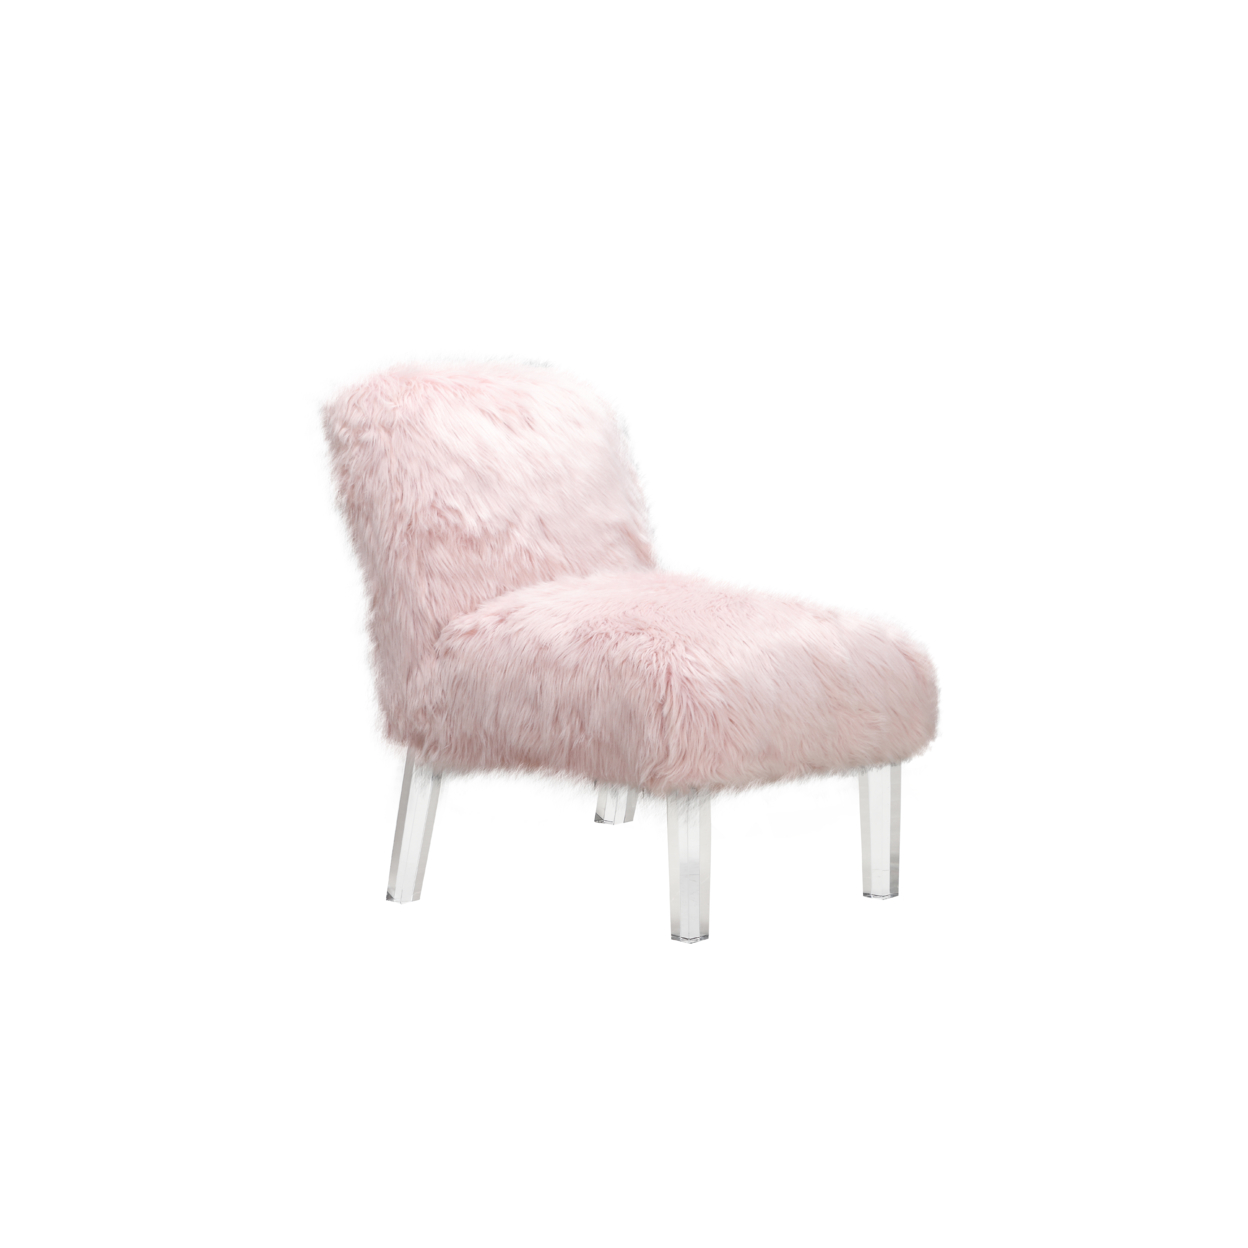 Iconic Home Filipe Accent Side Chair Sleek Stylish Faux Fur Upholstered Armless Design Acrylic Legs - White